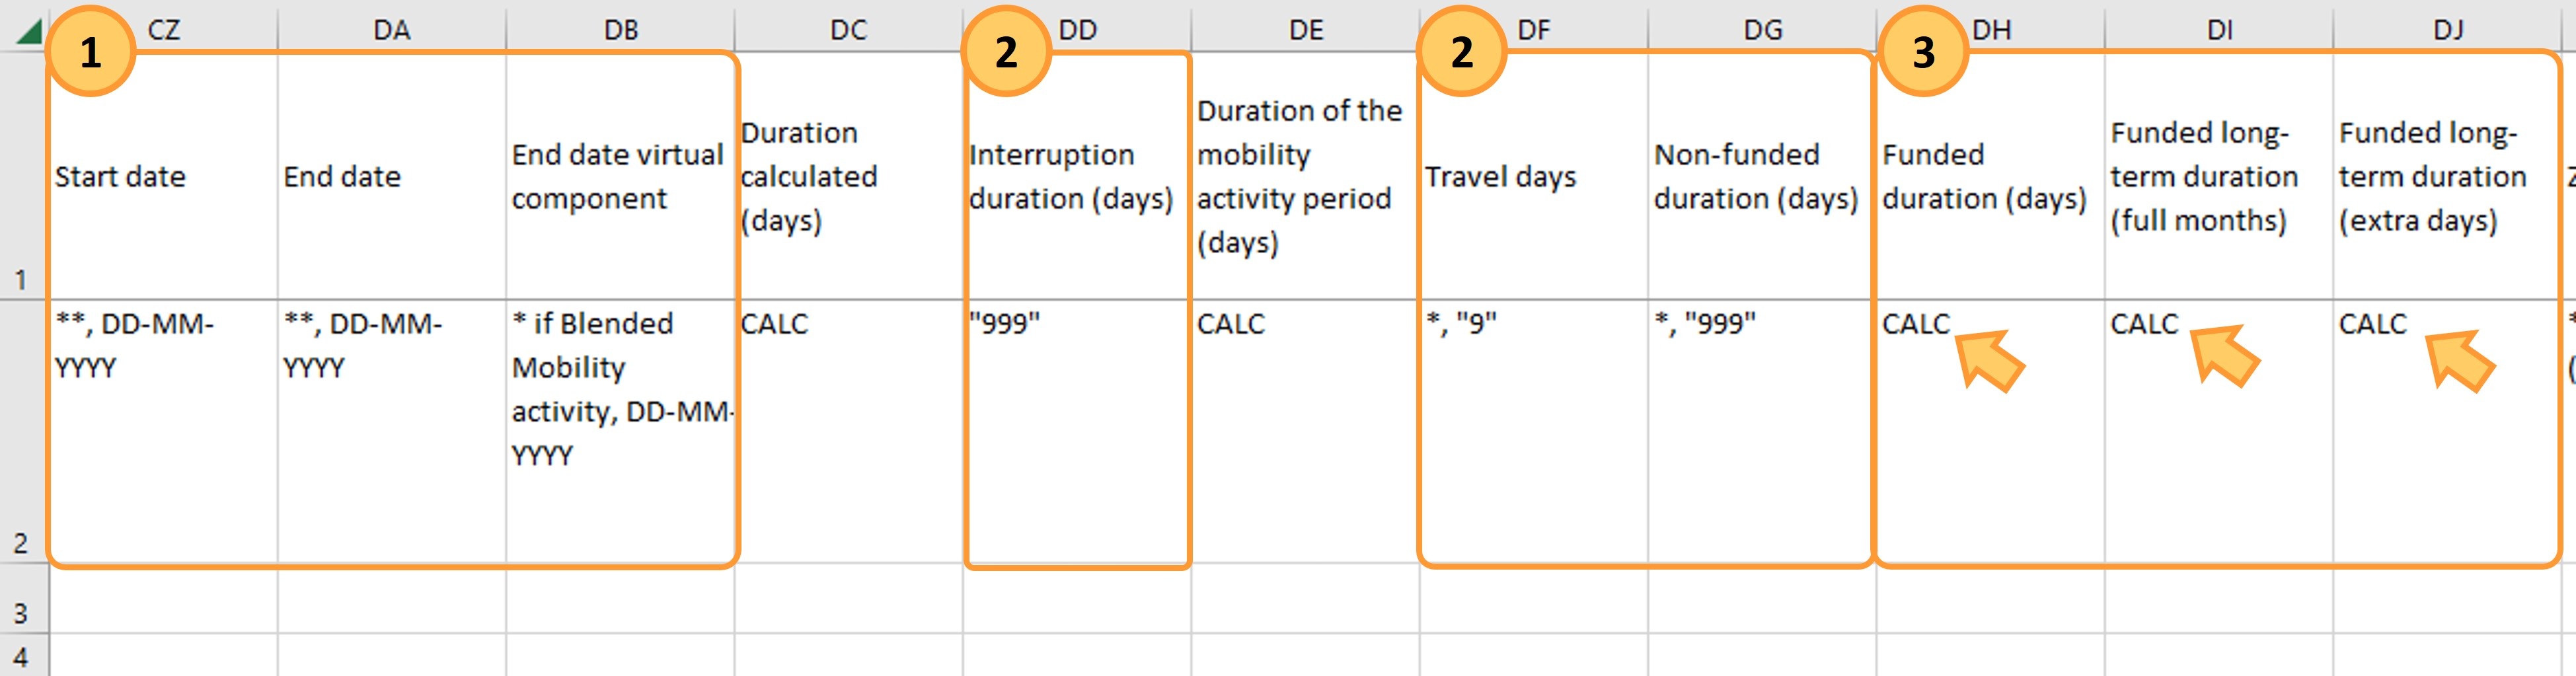 Date and Durations